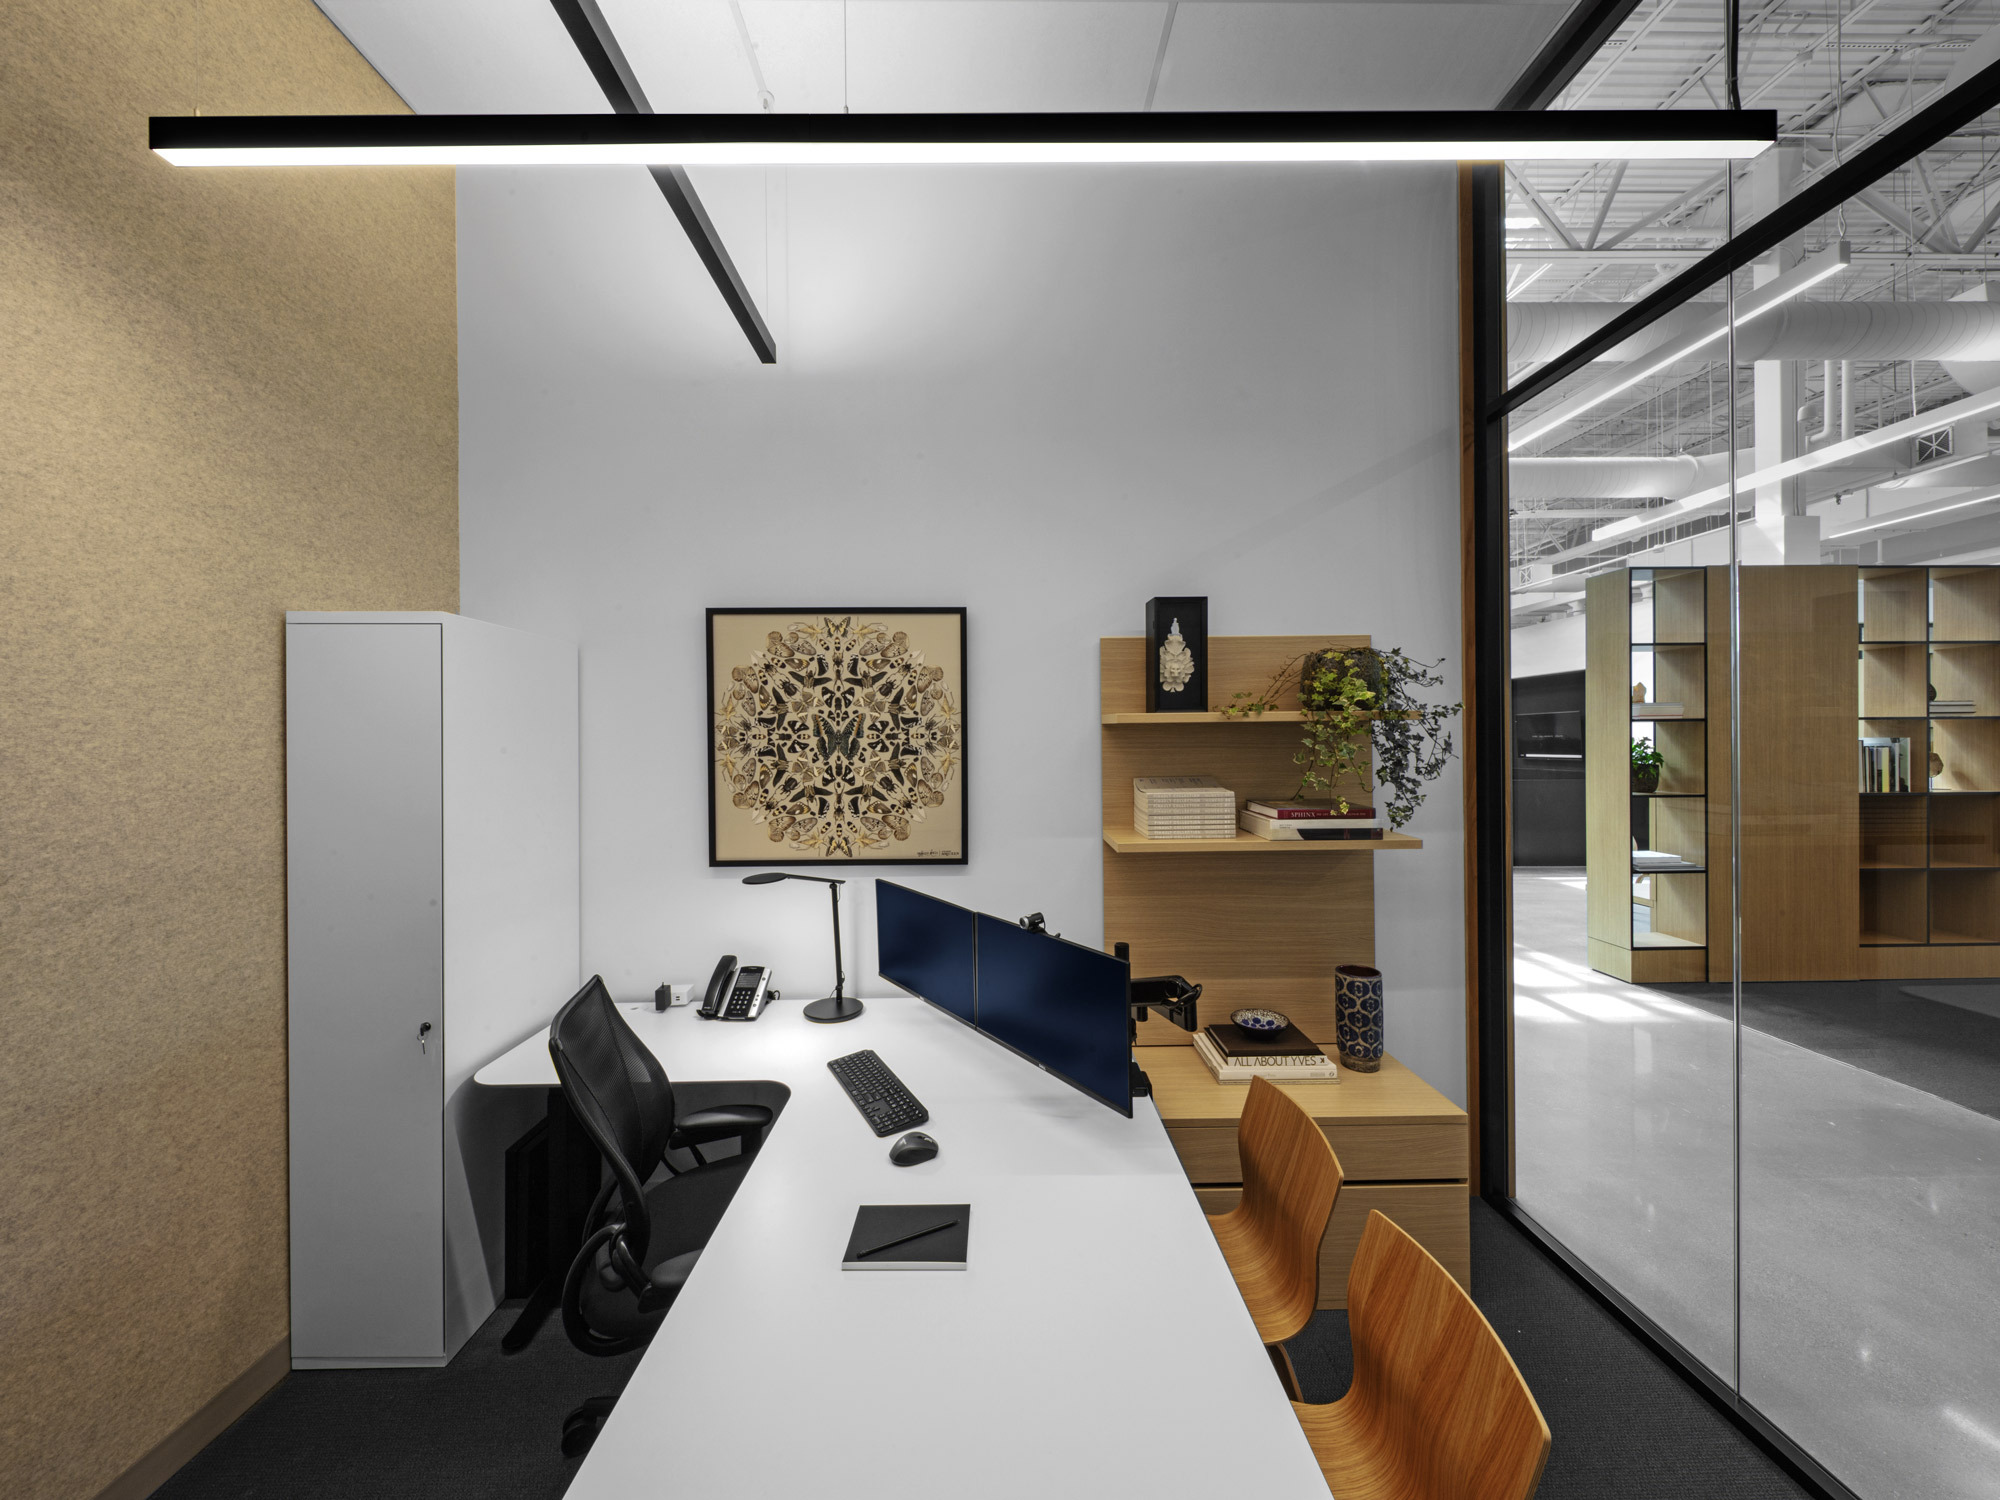 Minimalist office space boasting a sleek white desk with a desktop setup, ergonomic black chair, and decorative plants juxtaposed against a monochromatic color scheme, accentuated by geometric wall art and framed by linear suspended lighting. The glass partition reflects an open-plan environment beyond.